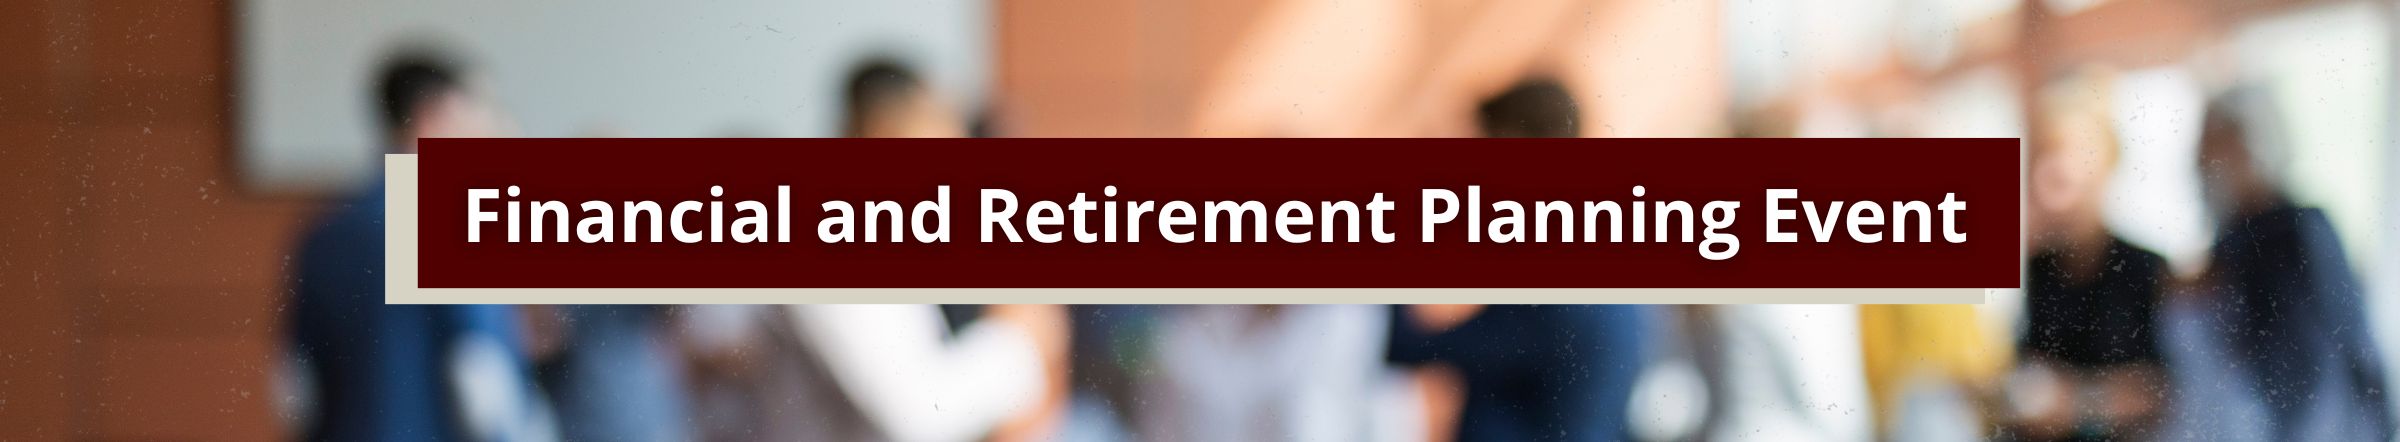 Financial and Retirement Planning Event